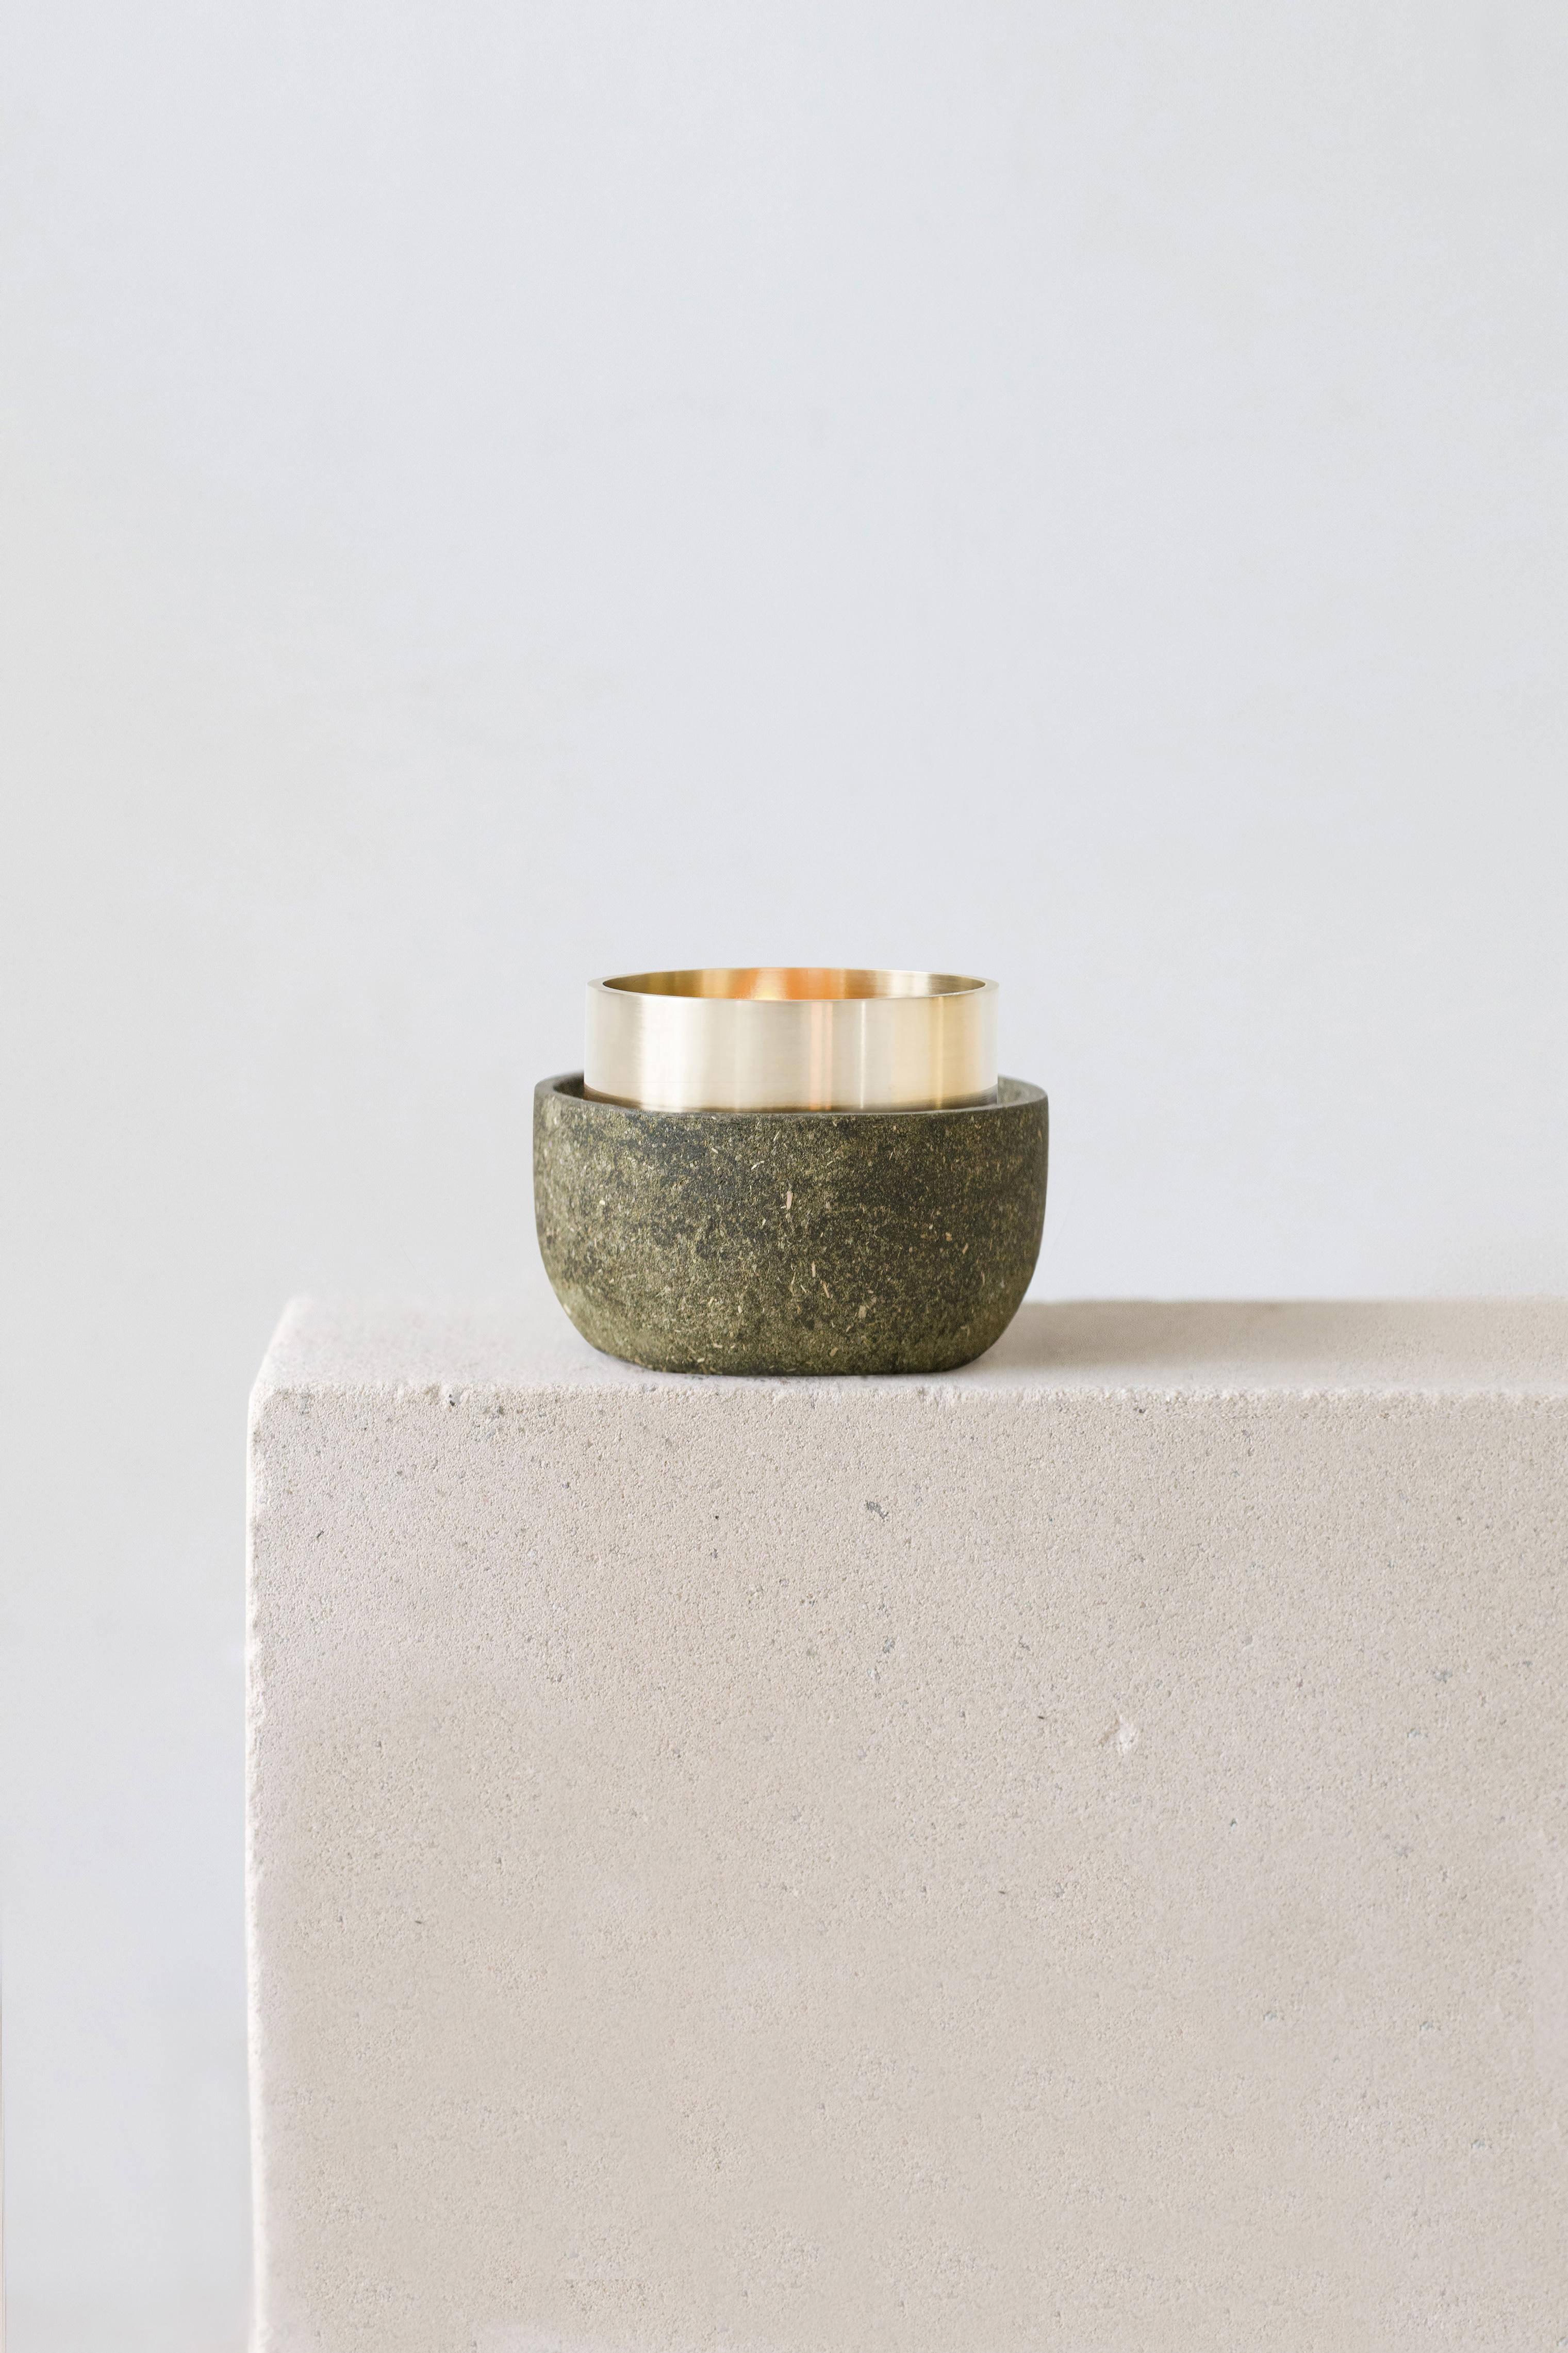 Tree Leaves candle holder by Evelina Kudabaite Studio
Handmade
Materials: tree leaves, brass
Dimensions: H 55 mm x D 65 mm
Colour: green
Notes: for dry use

Since 2015, product designer Evelina Kudabaite keeps on developing and making GIRIA